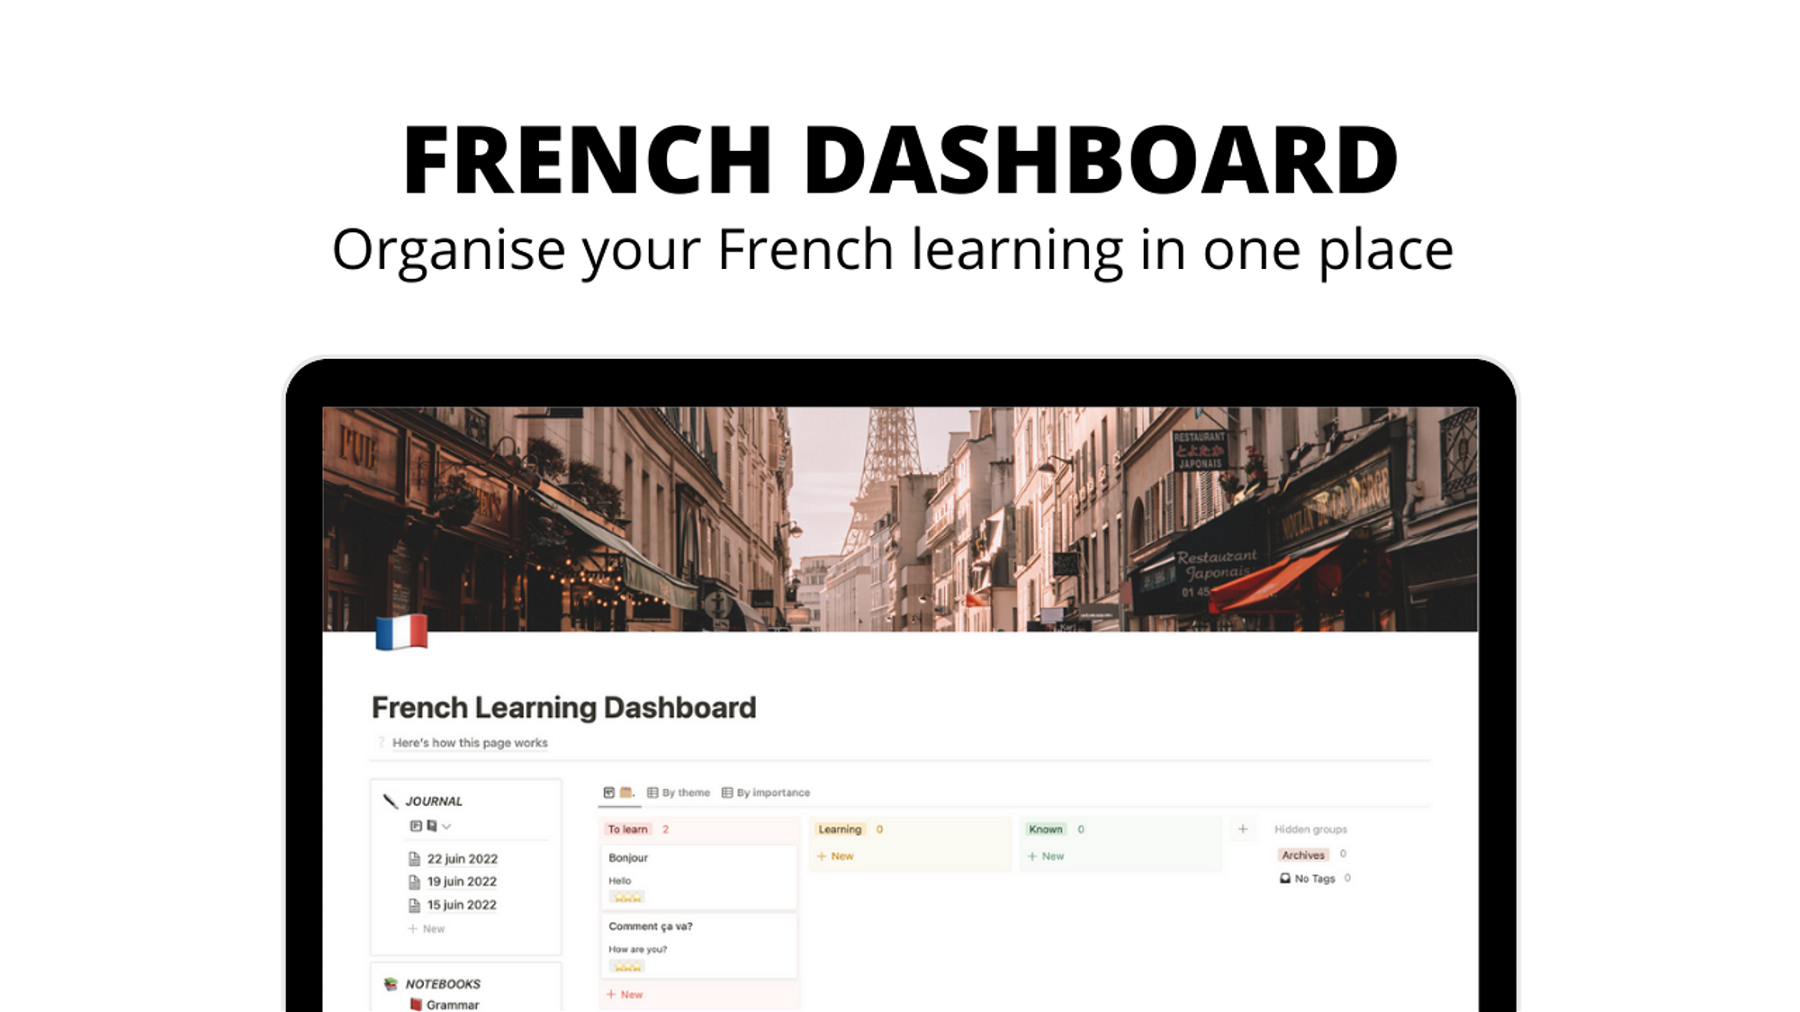 FRENCH DASHBOARD 🇫🇷 - A single page dashboard to learn French (complete with a flashcard system, journal practice and notebooks)